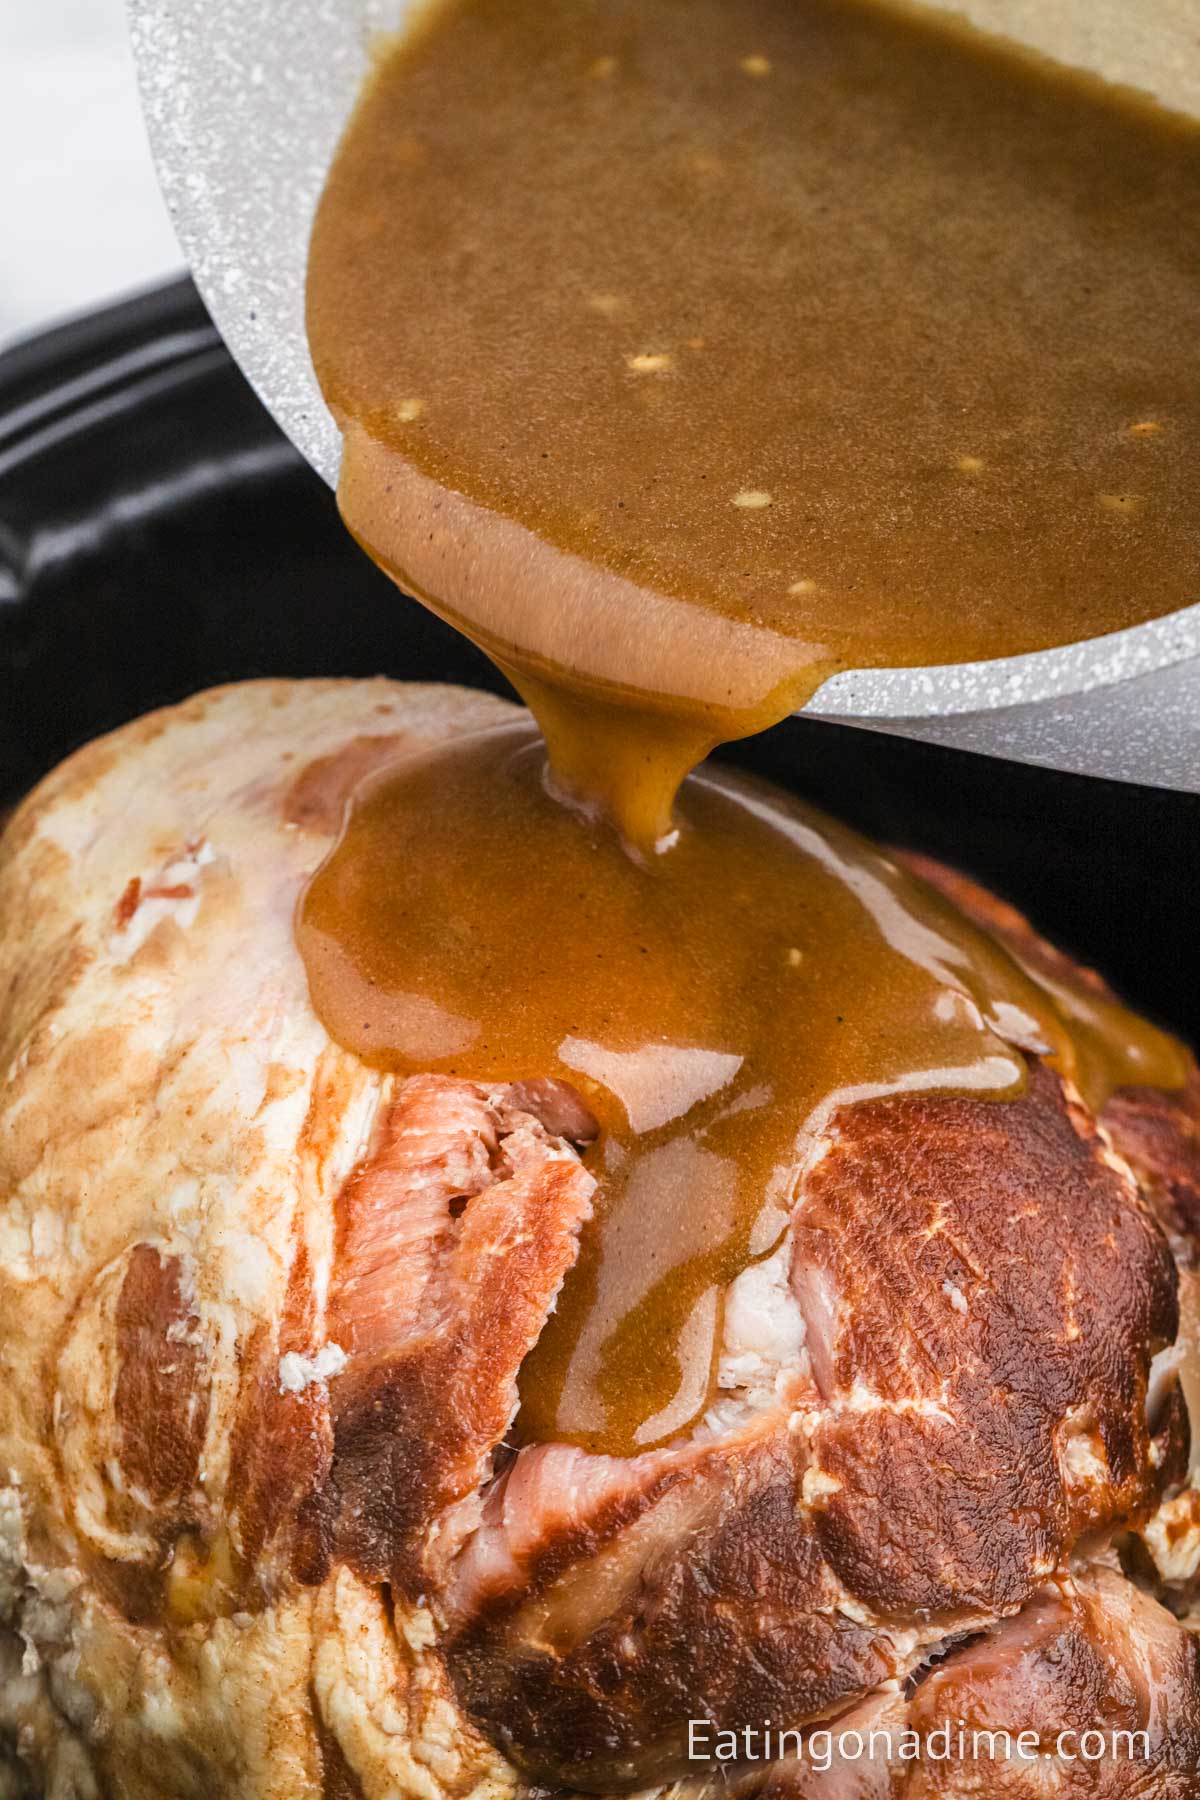 Pouring the glaze over the top of the ham in the slow cooker